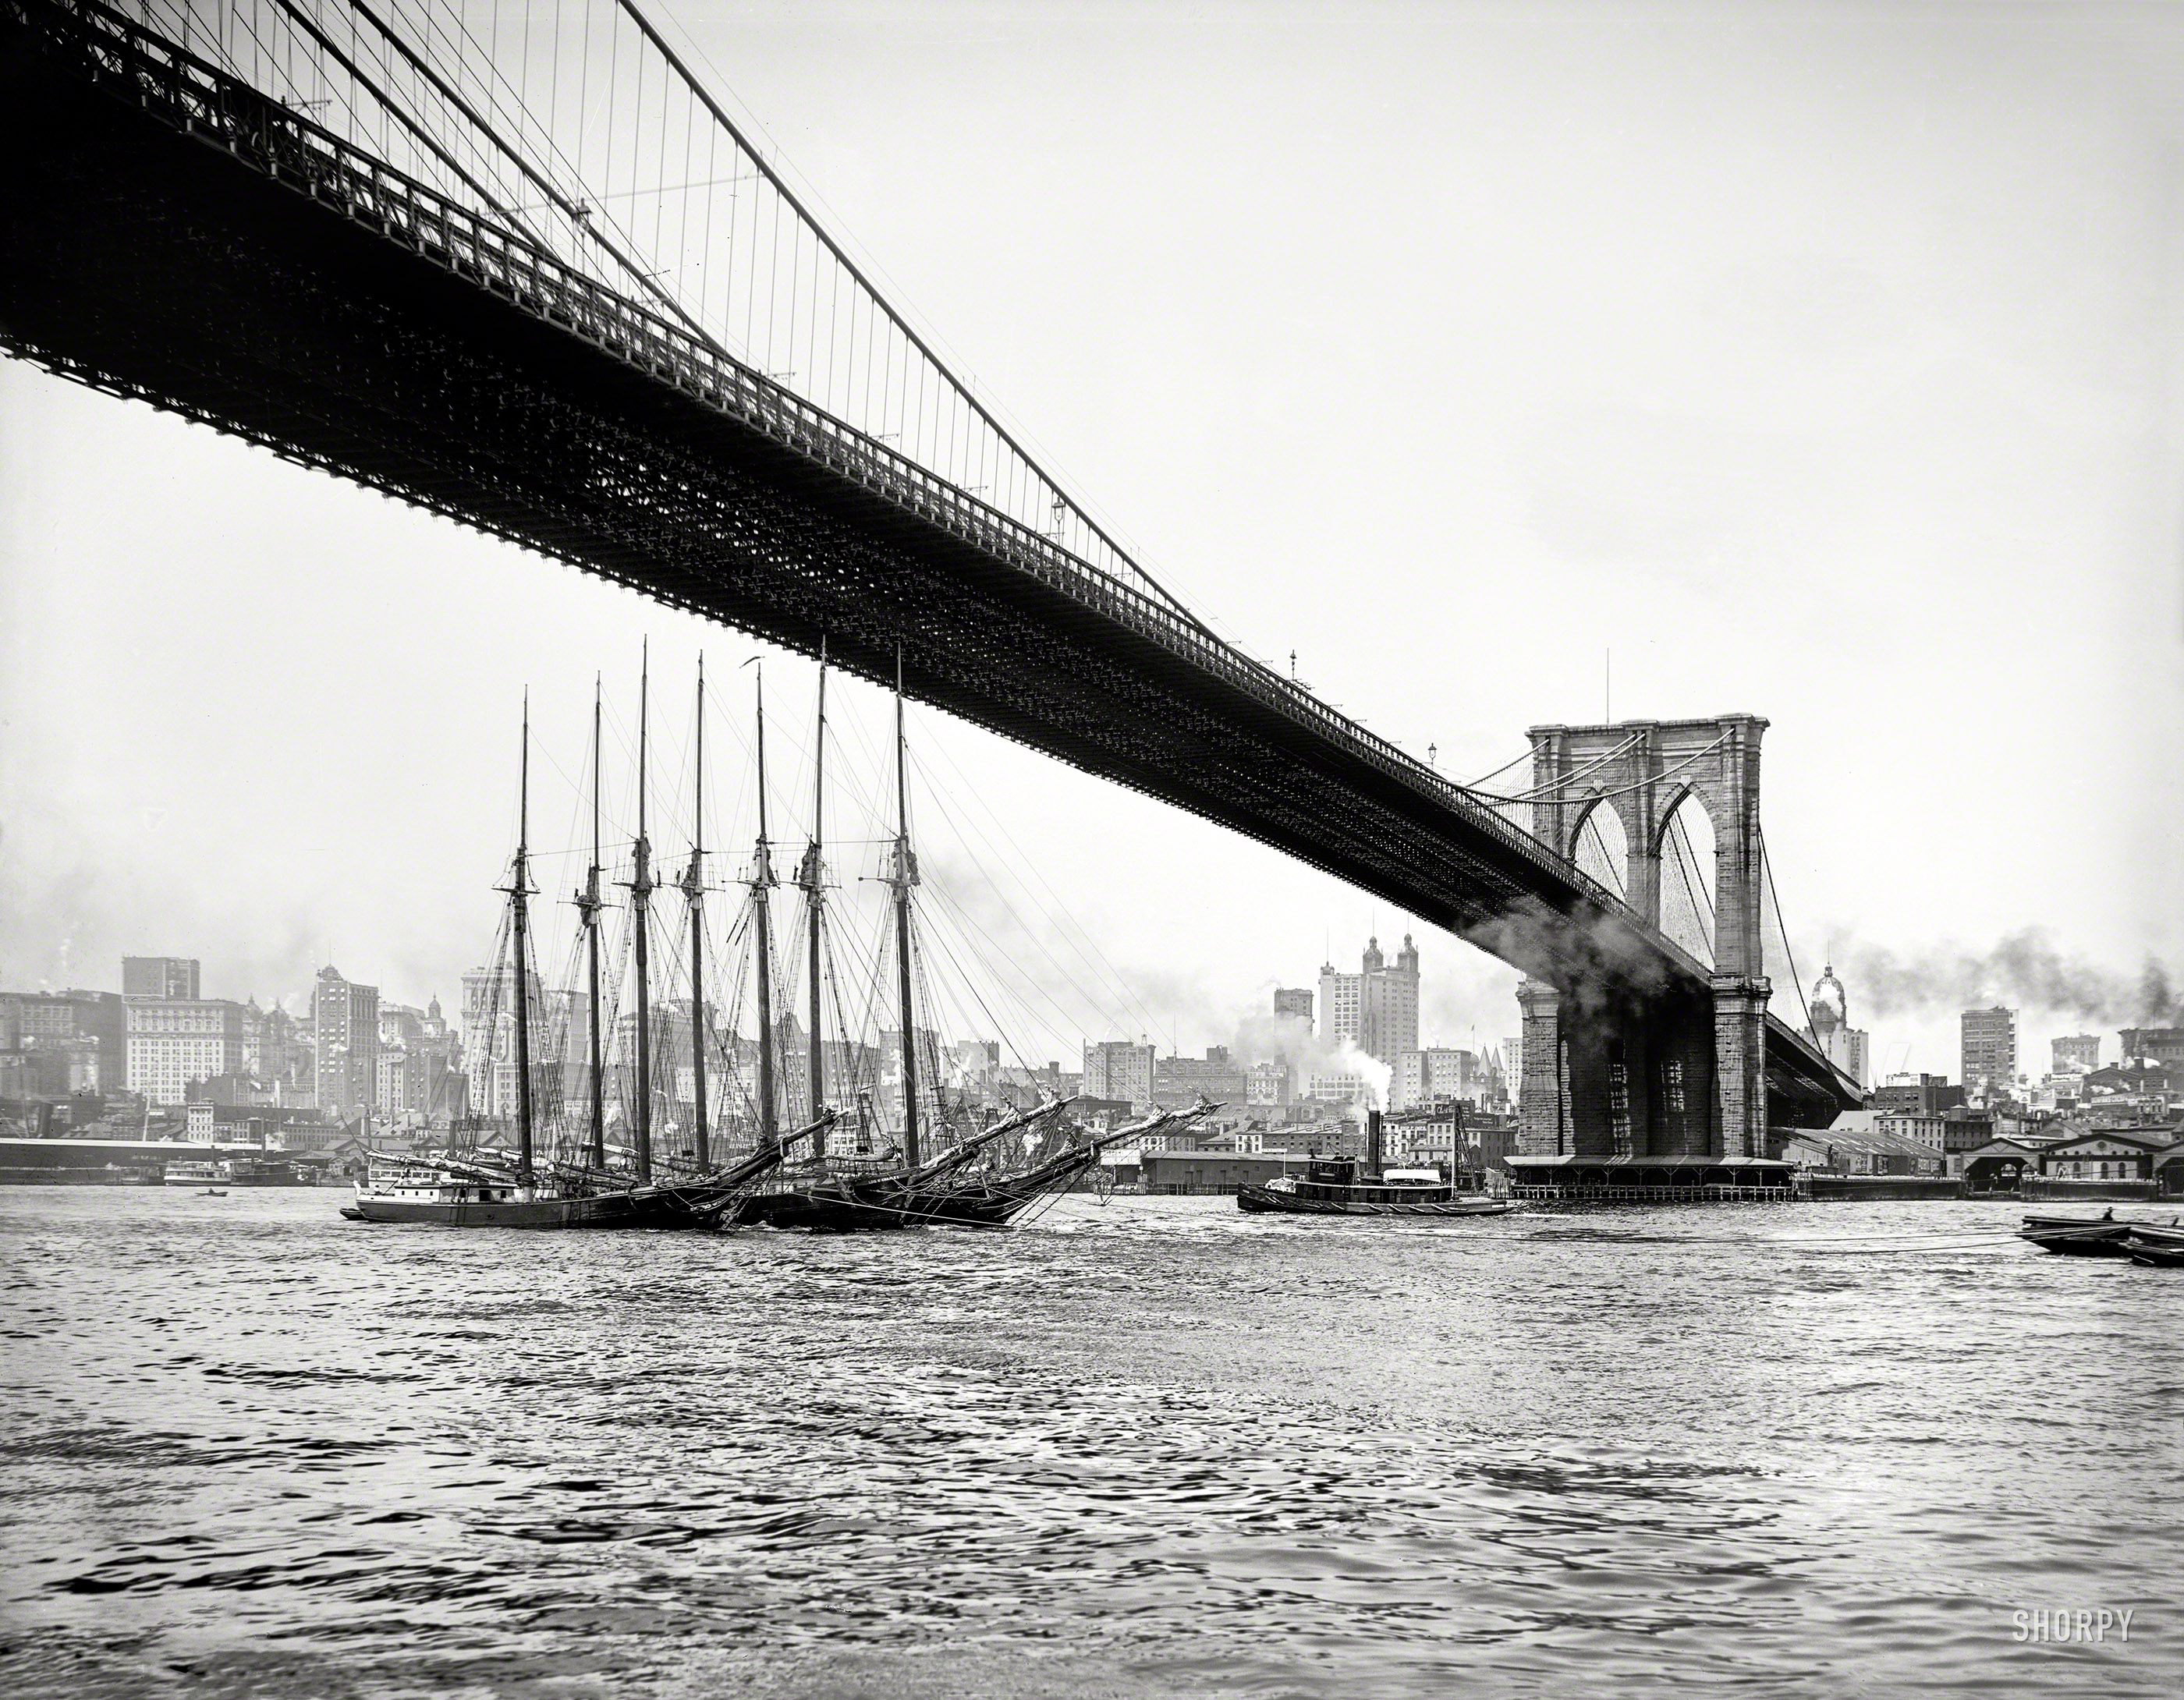 New York circa 1903. "Manhattan from under the Brooklyn Bridge." 8x10 inch dry plate glass negative, Detroit Publishing Company. View full size.